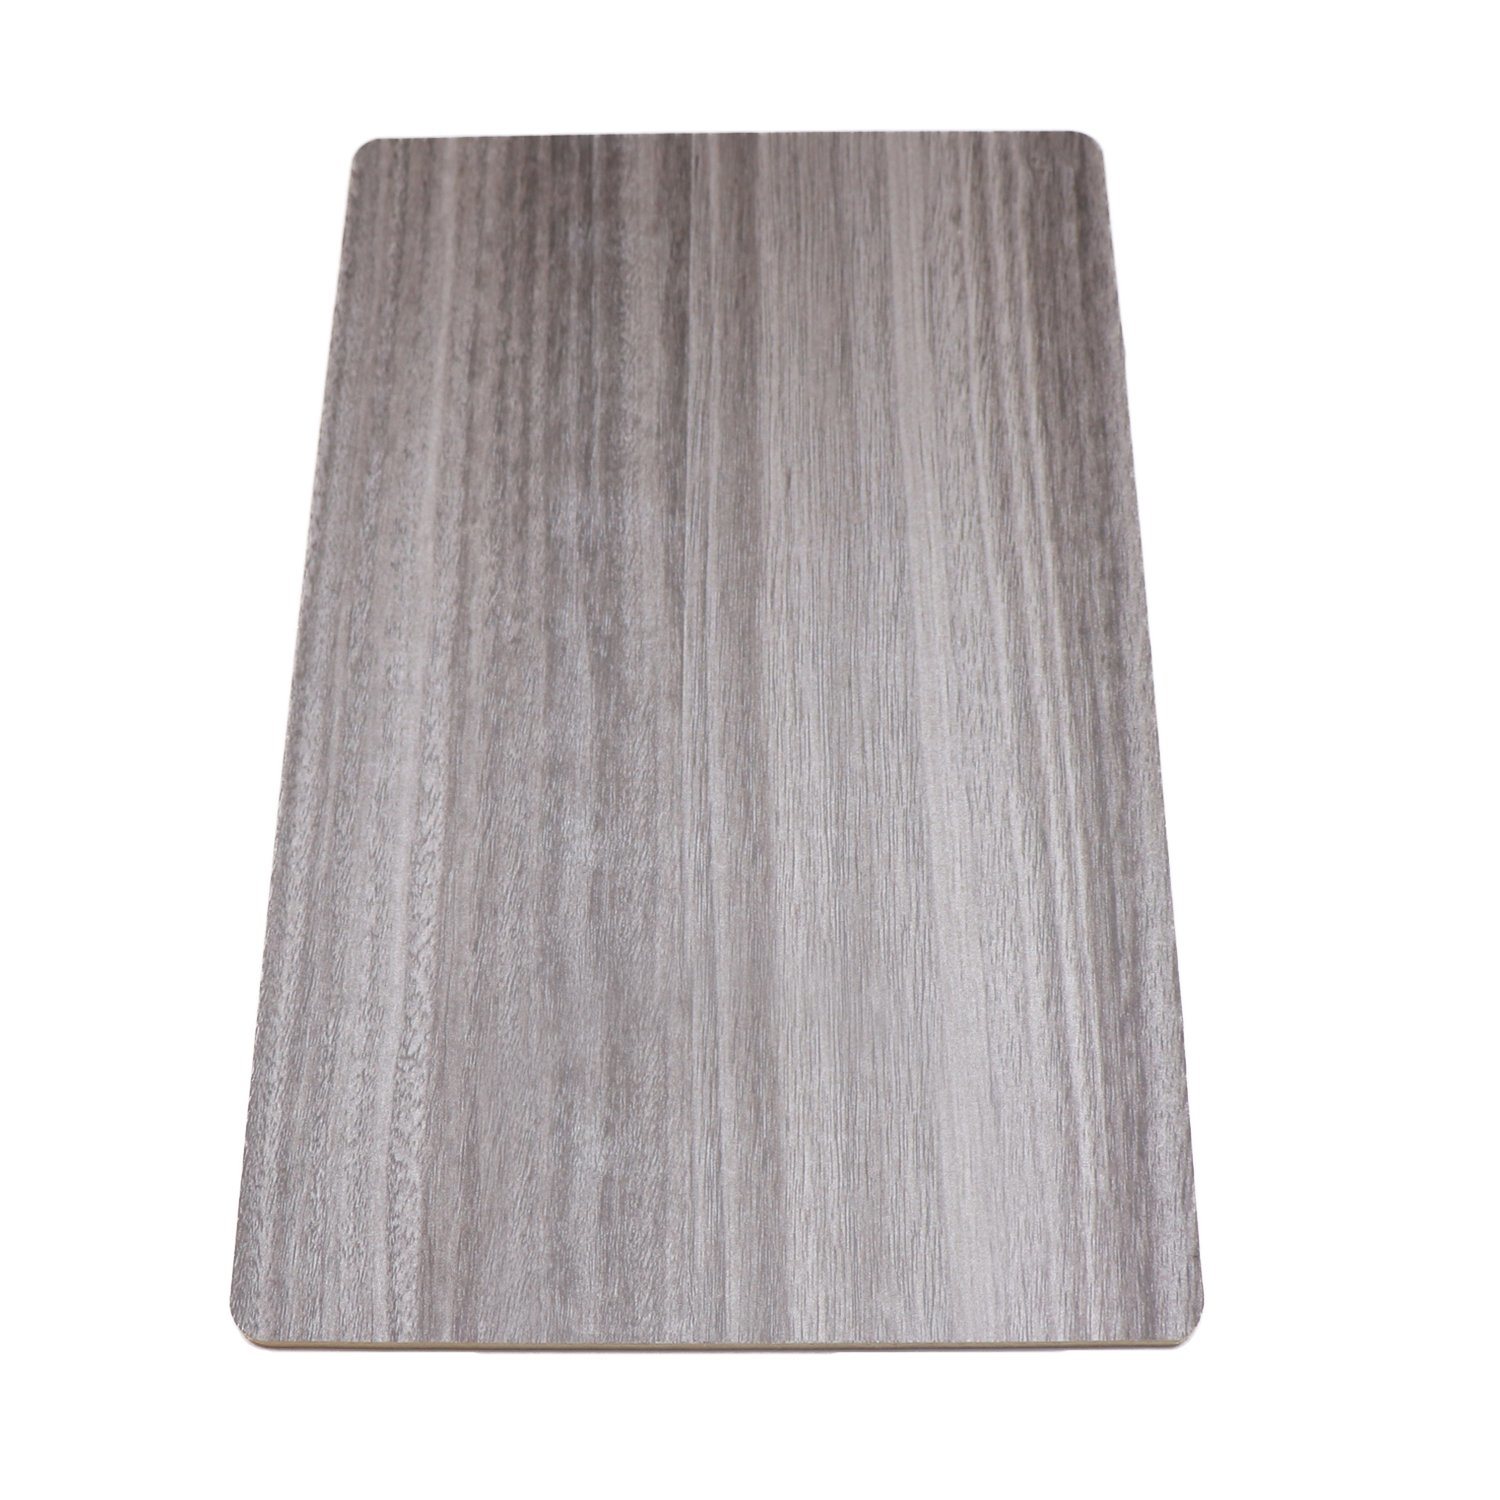 China High Quality Woodgrain Paper Coated Plywood Board Fancy Grain Melamine Faced Plywood for Decoration